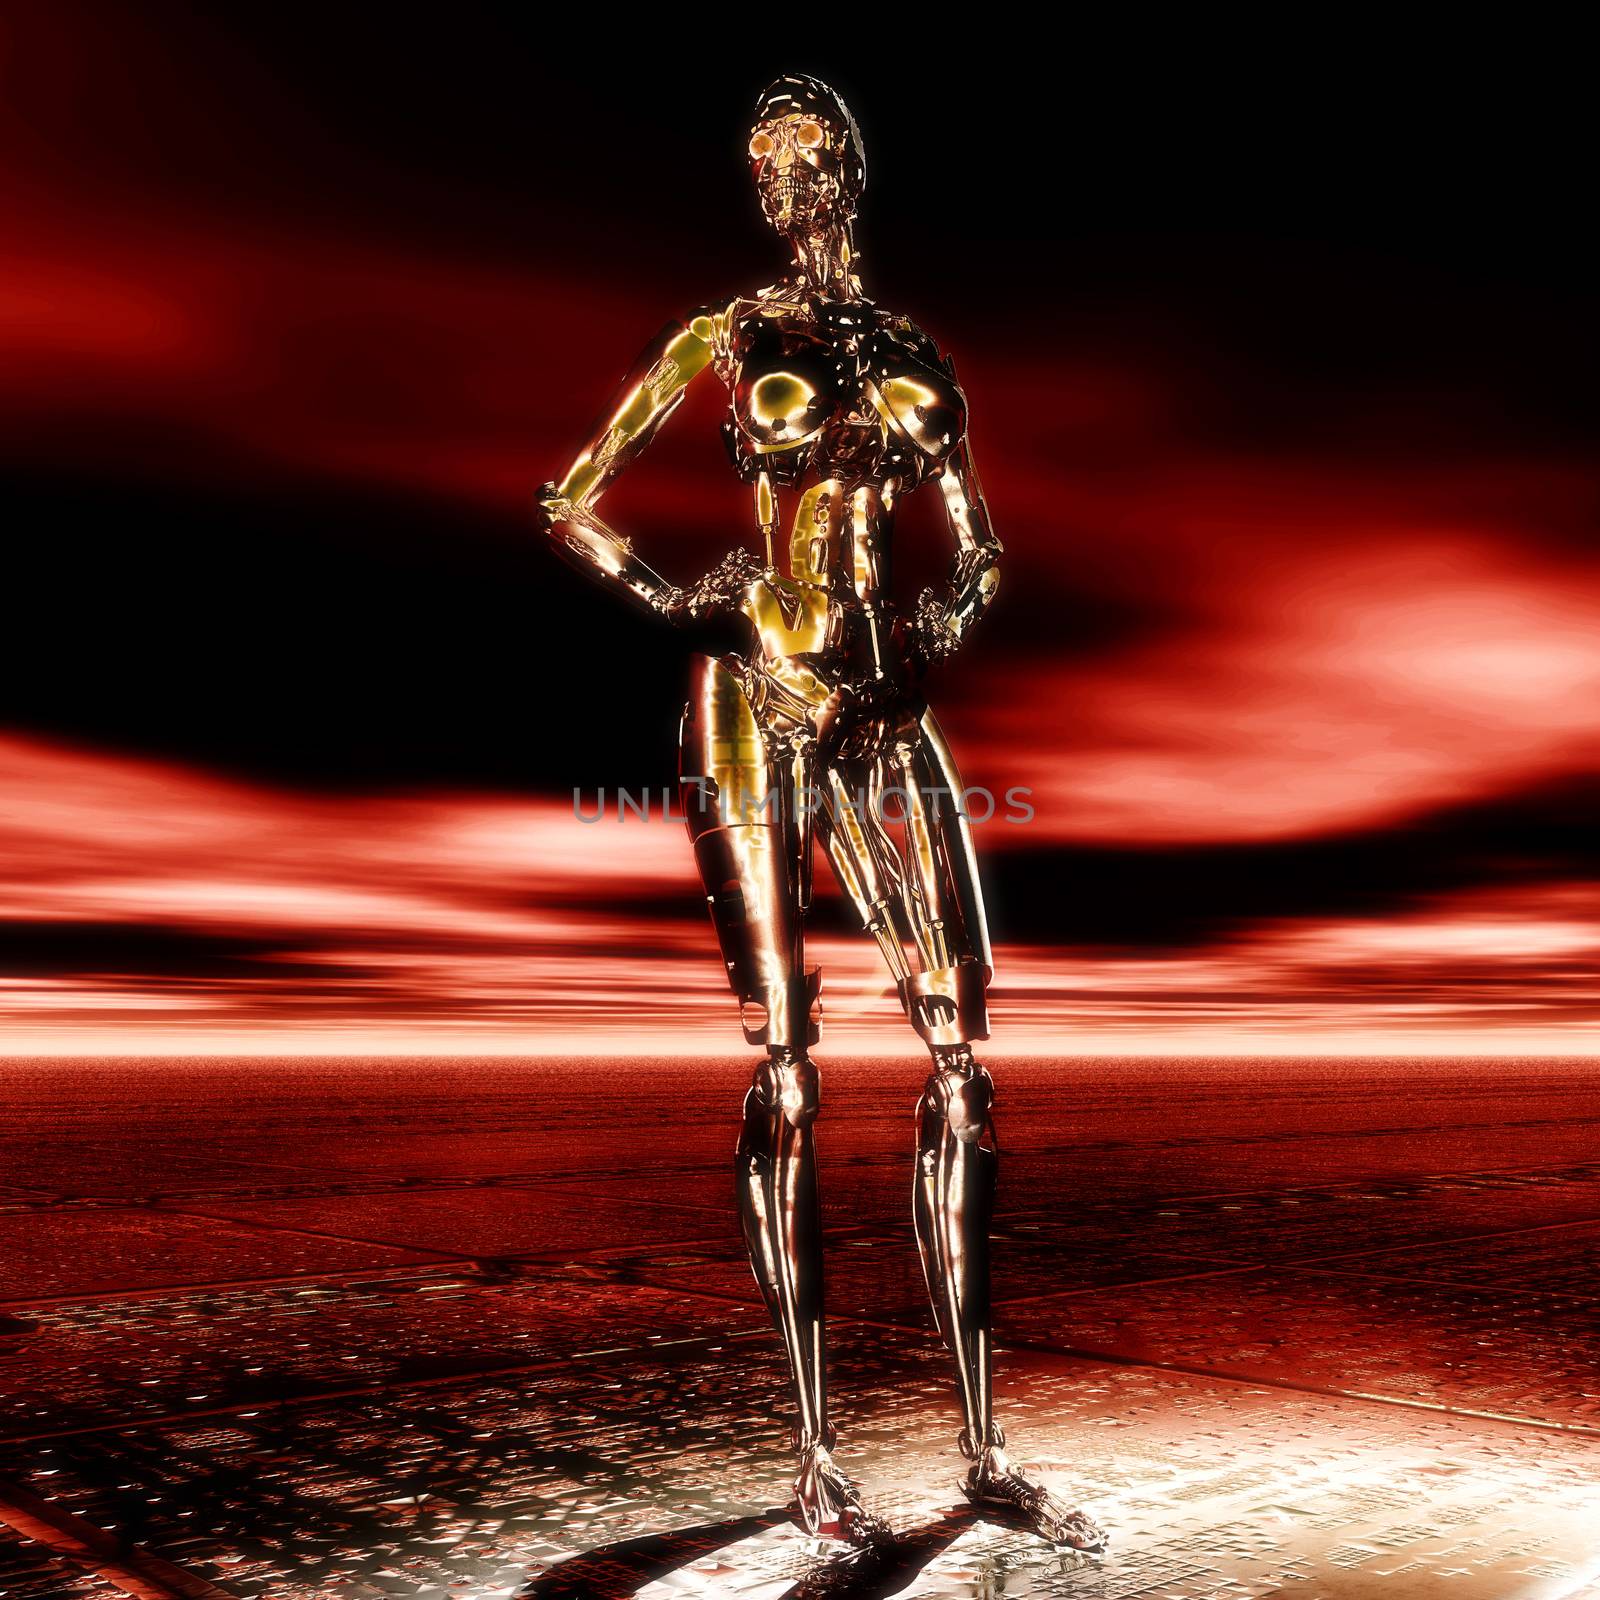 3D Illustration; 3D Rendering of a Cyborg by 3quarks